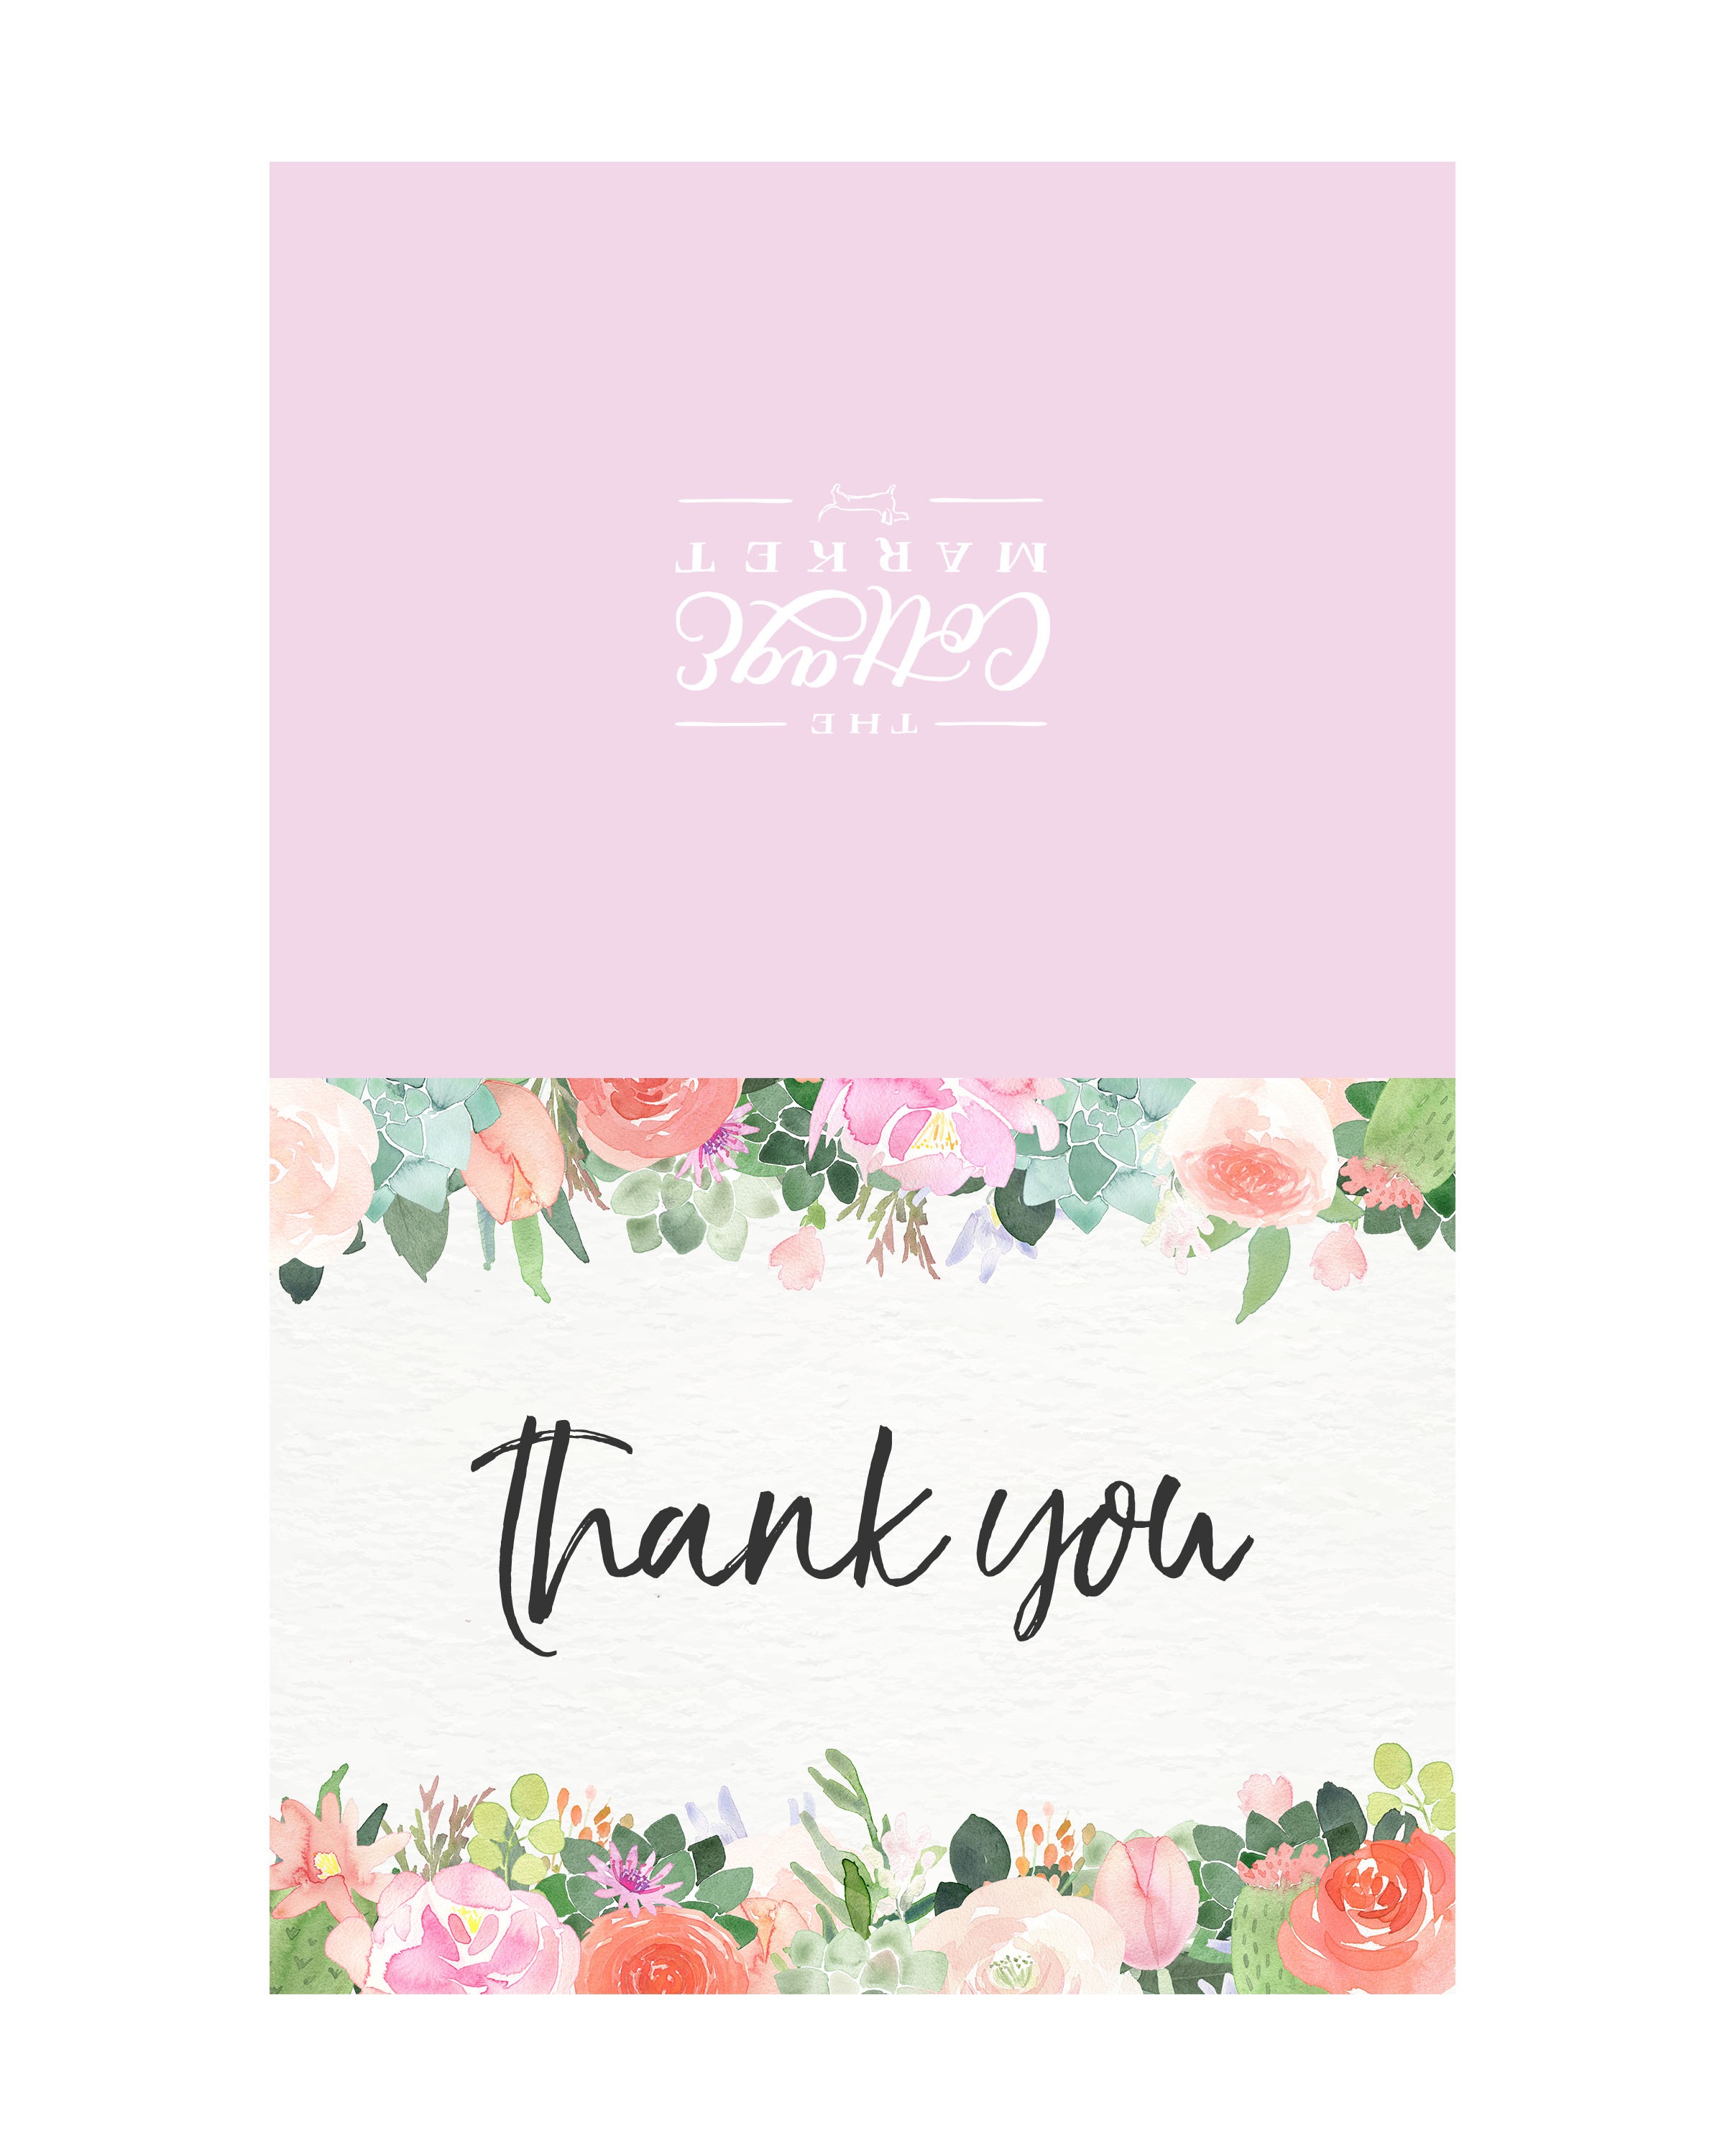 10 Free Printable Thank You Cards You Can&amp;#039;t Miss - The Cottage Market - Free Printable Cards